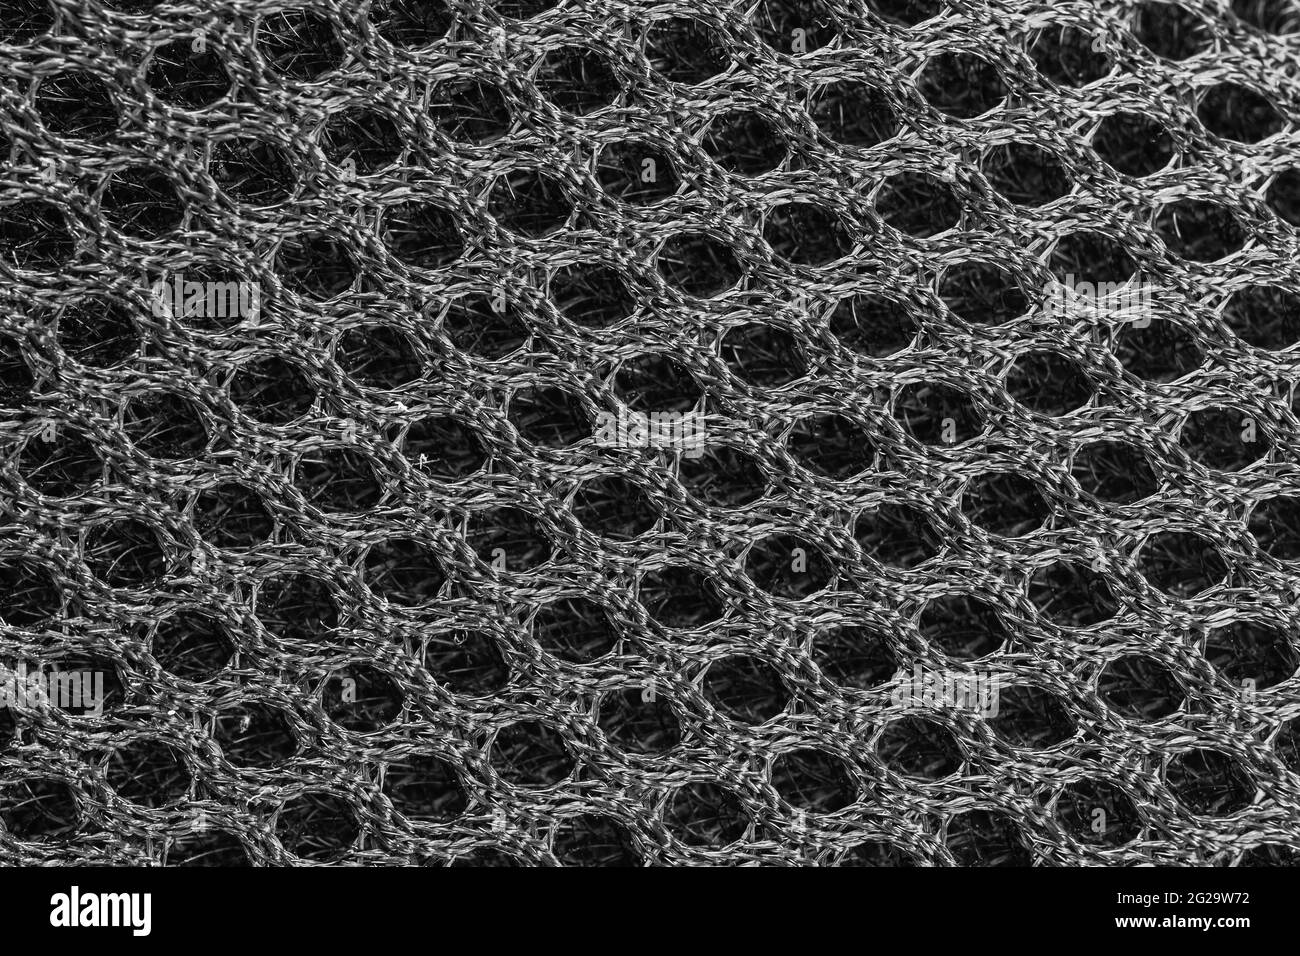 Mesh fabric Black and White Stock Photos & Images - Alamy